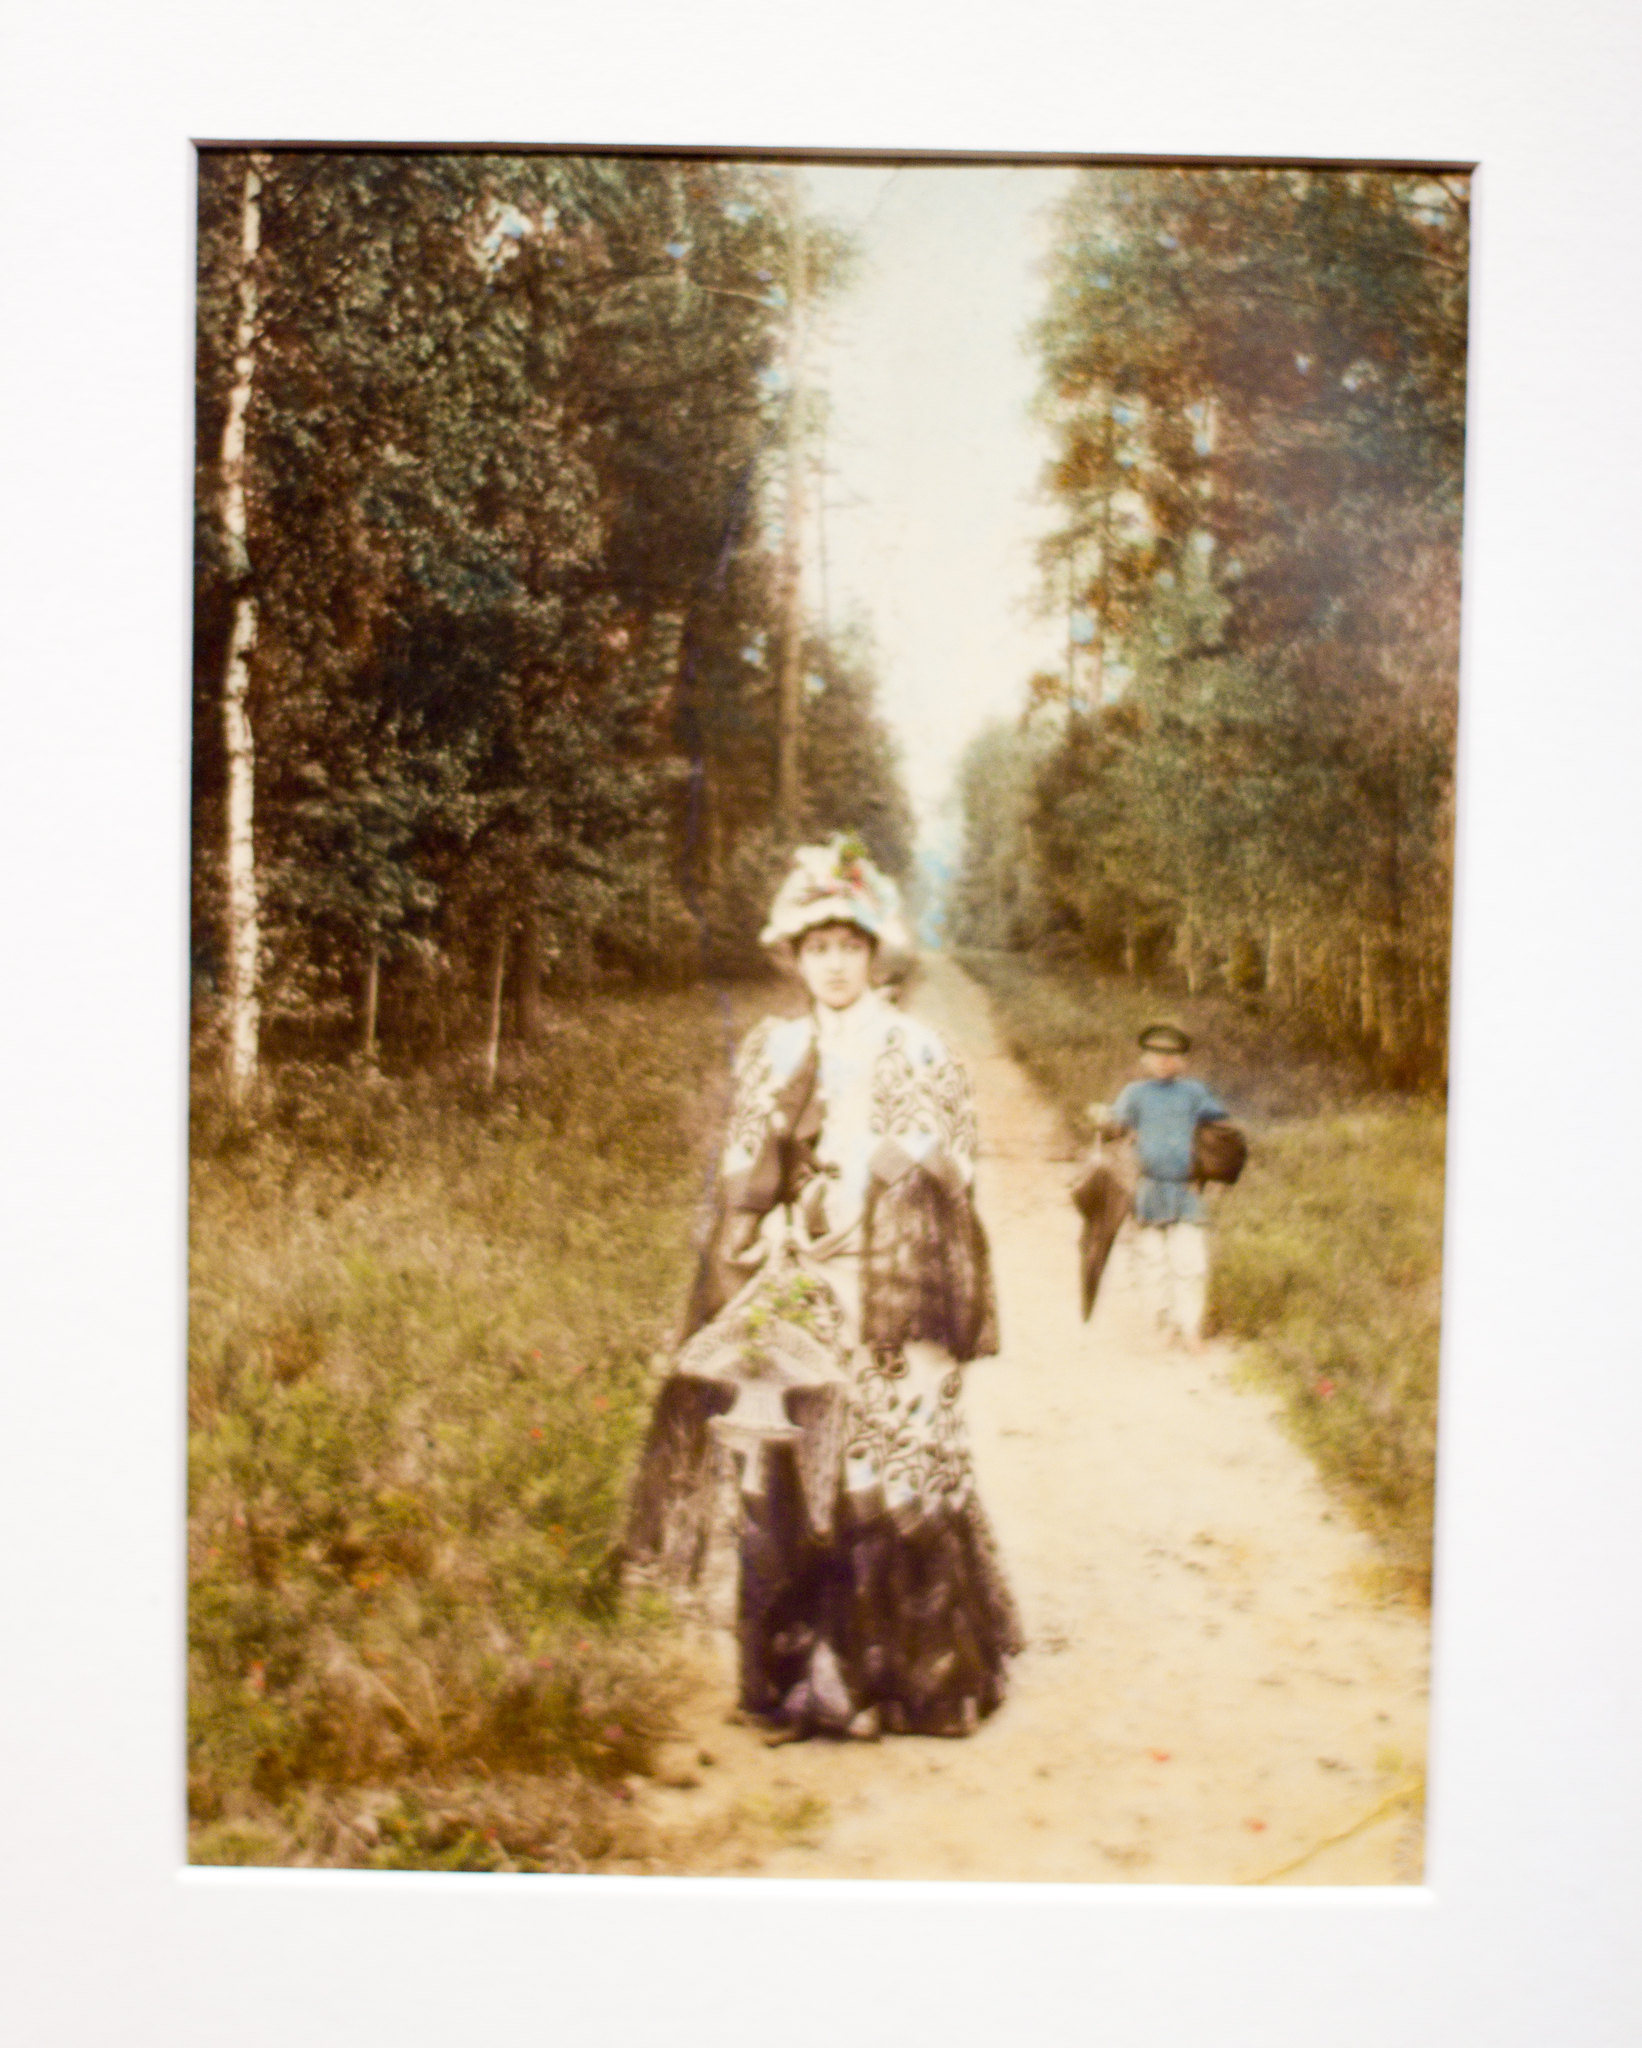 Primrose early russian colour photography photographers gallery london tapeparade laila blog tape parade